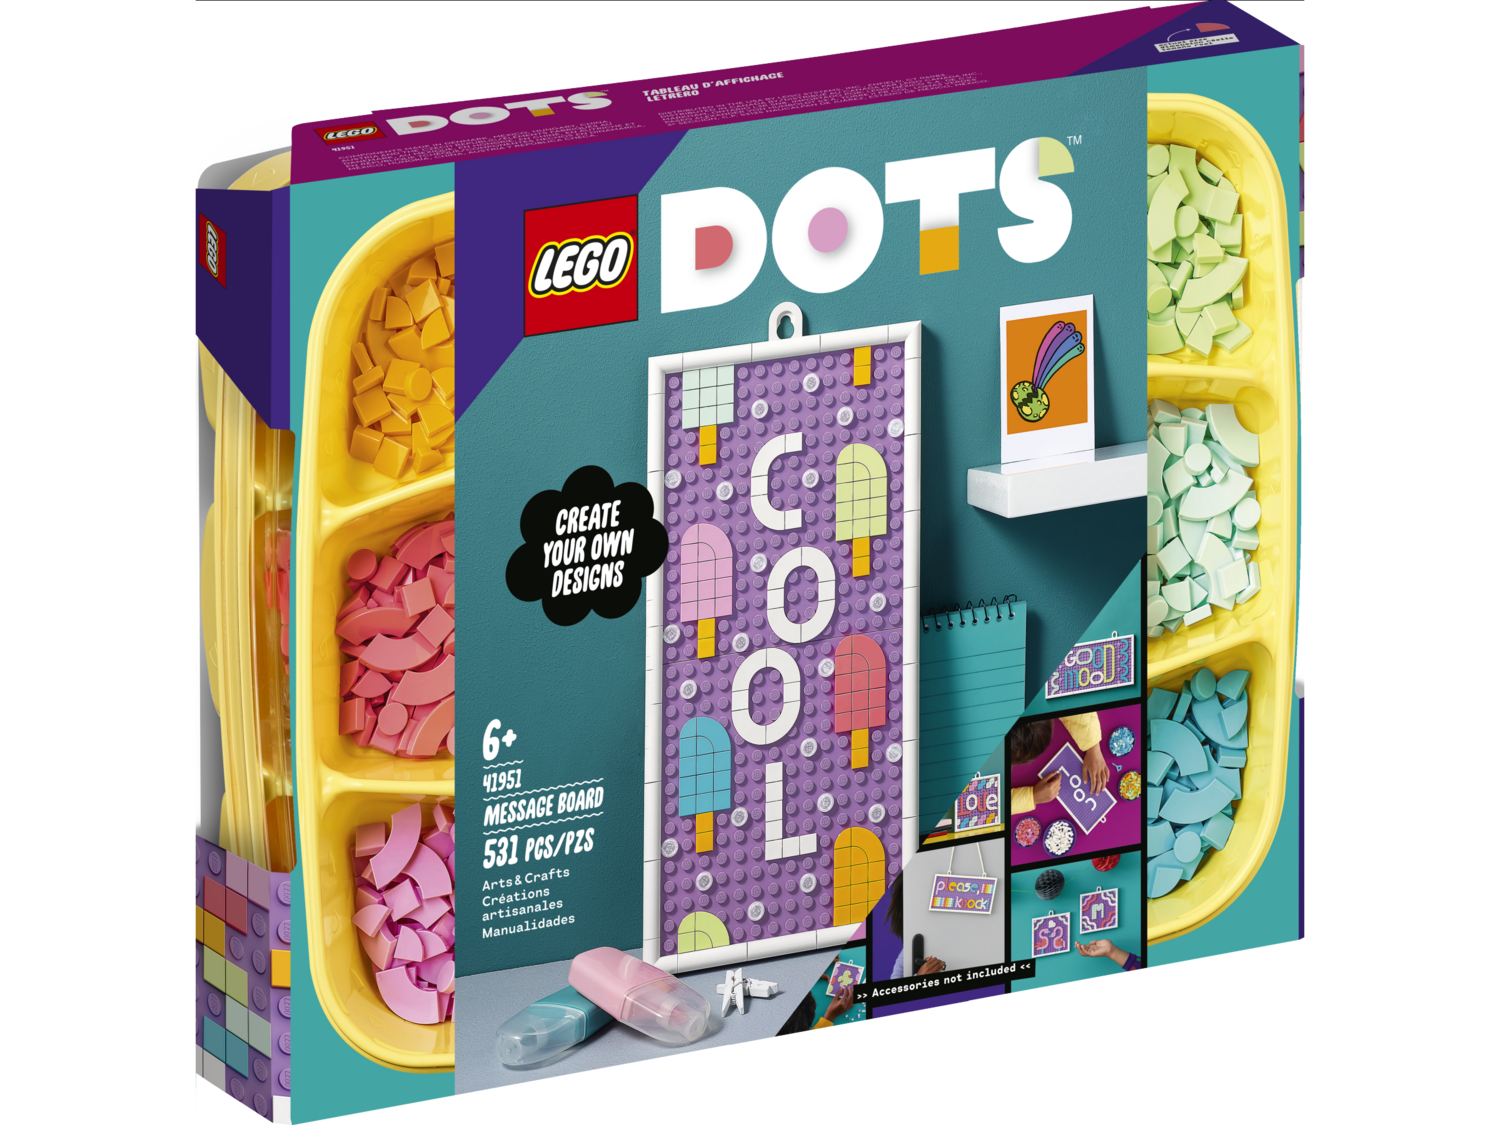 LEGO DOTS 41951 MESSAGE BOARD